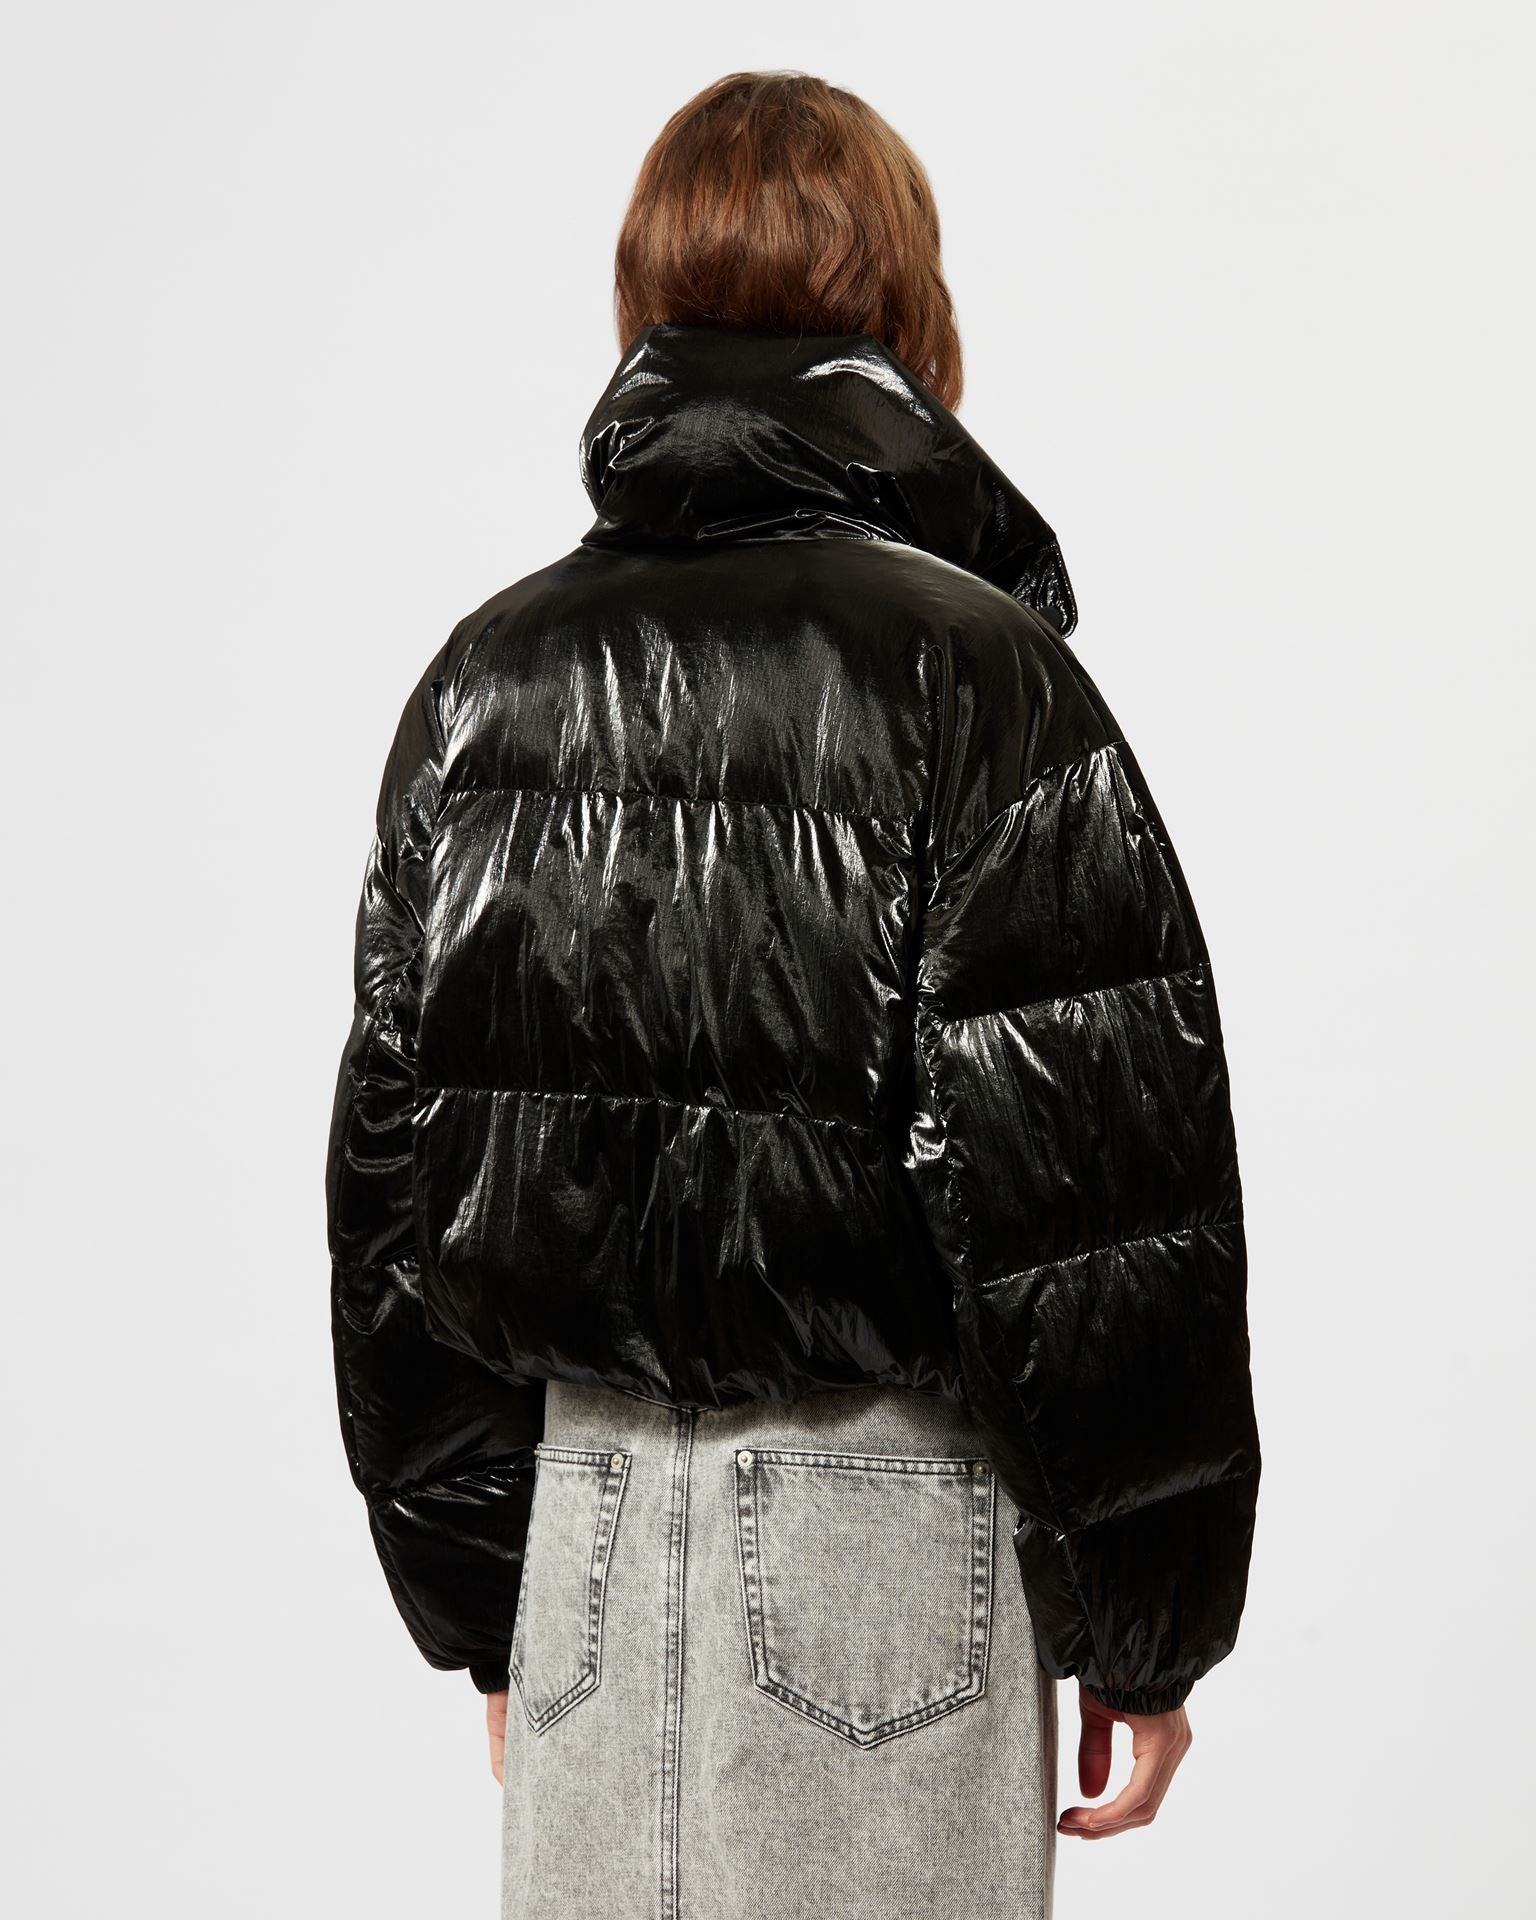 The Isabel Marant Telia Puffer Coat in Black available at The New Trend Australia